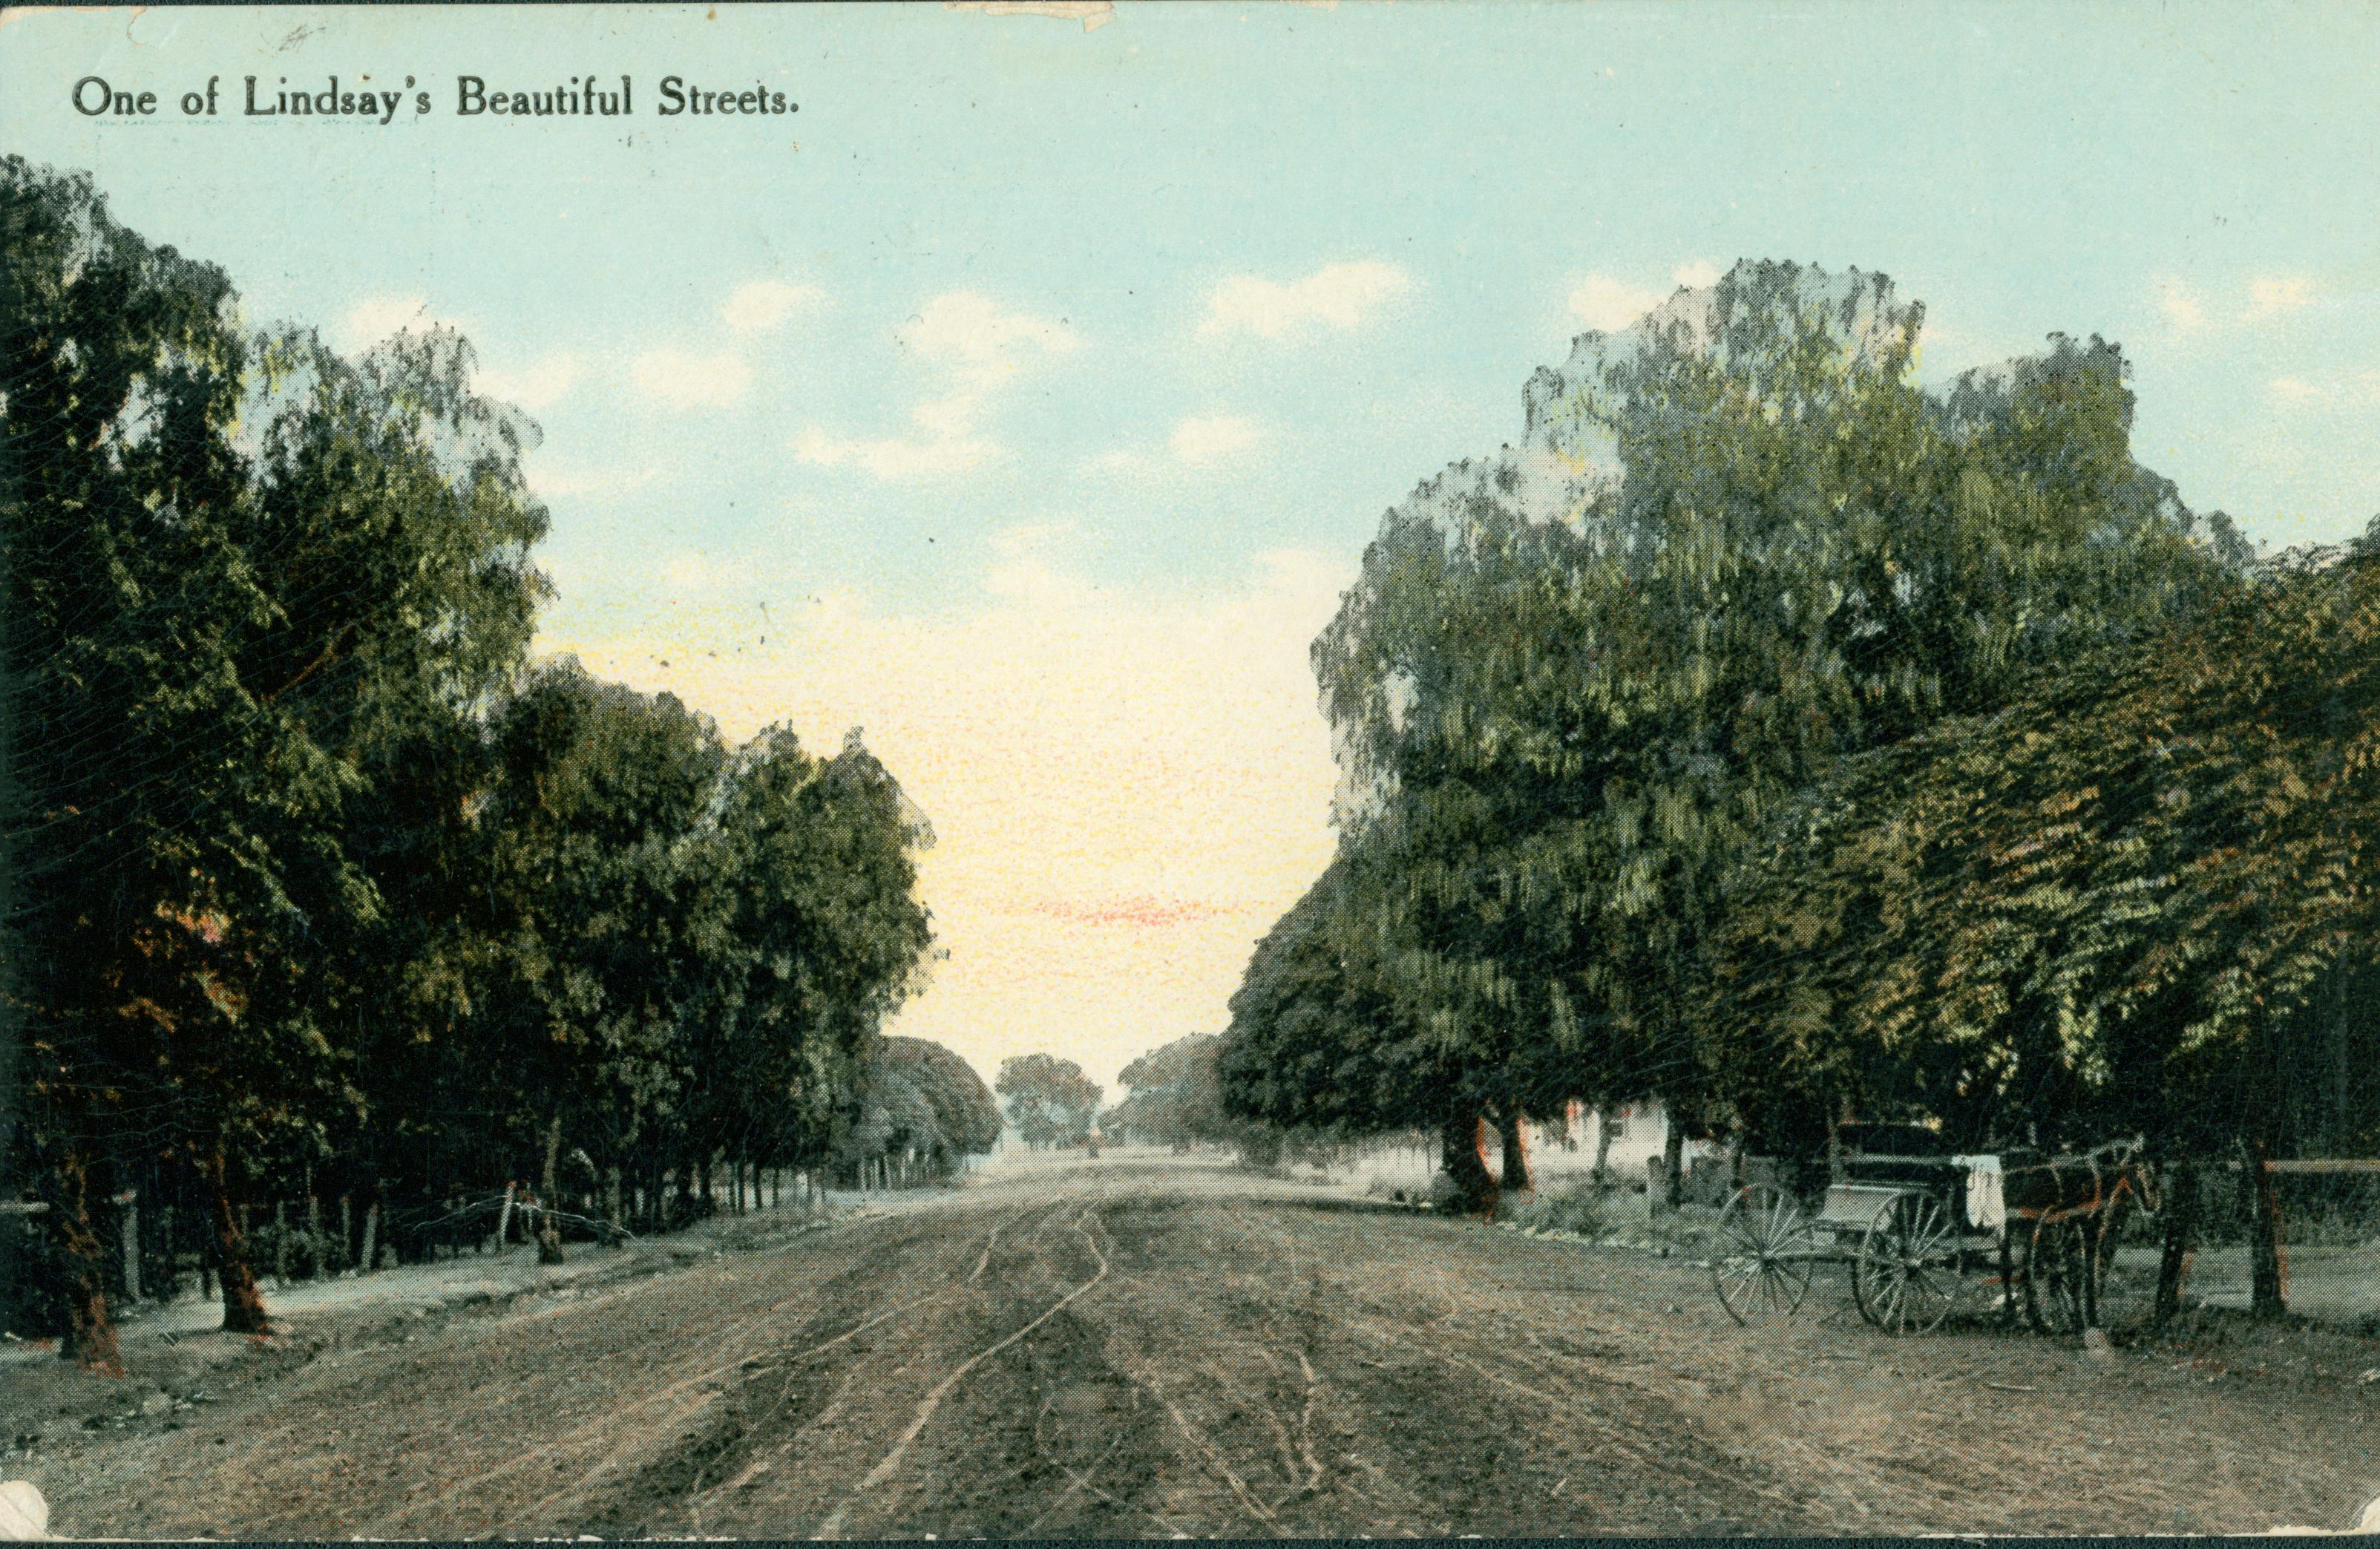 Shows a street in Lindsay lined by trees